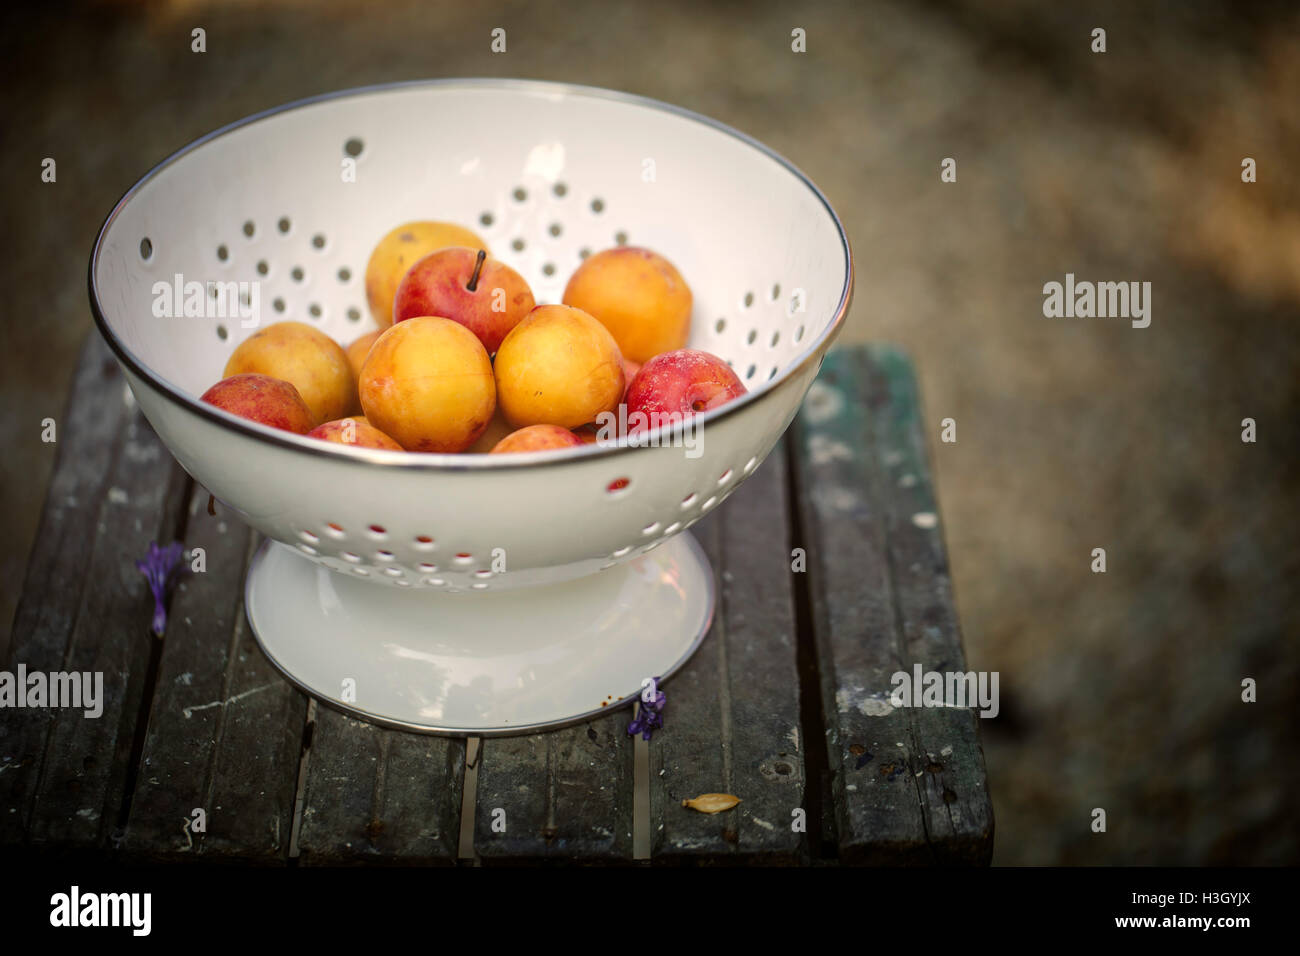 Rustic Still Life in Country Style with Ripe Yellow Plums Stock Photo